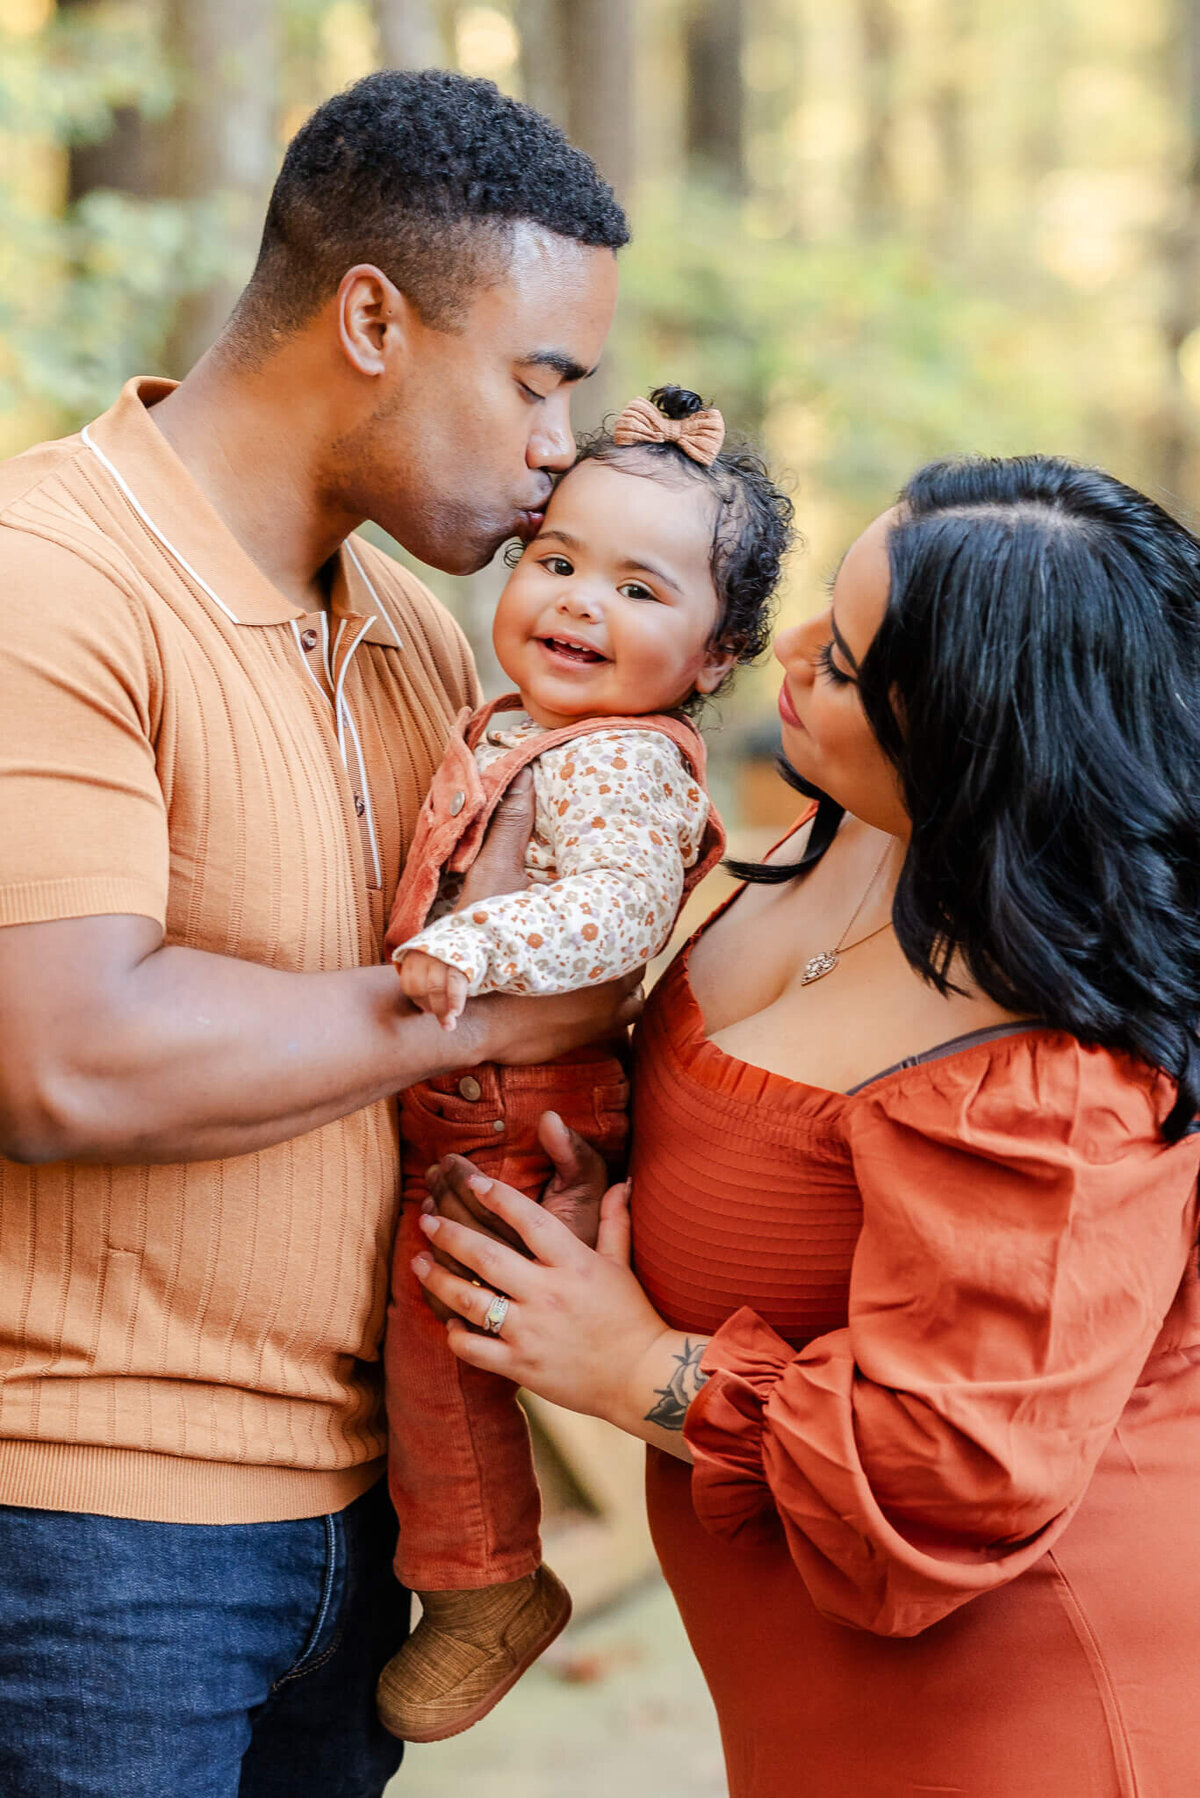 A dad kisses his toddler daughter on the forehead while the mom looks on lovingly during a Hampton Roads family photo session.